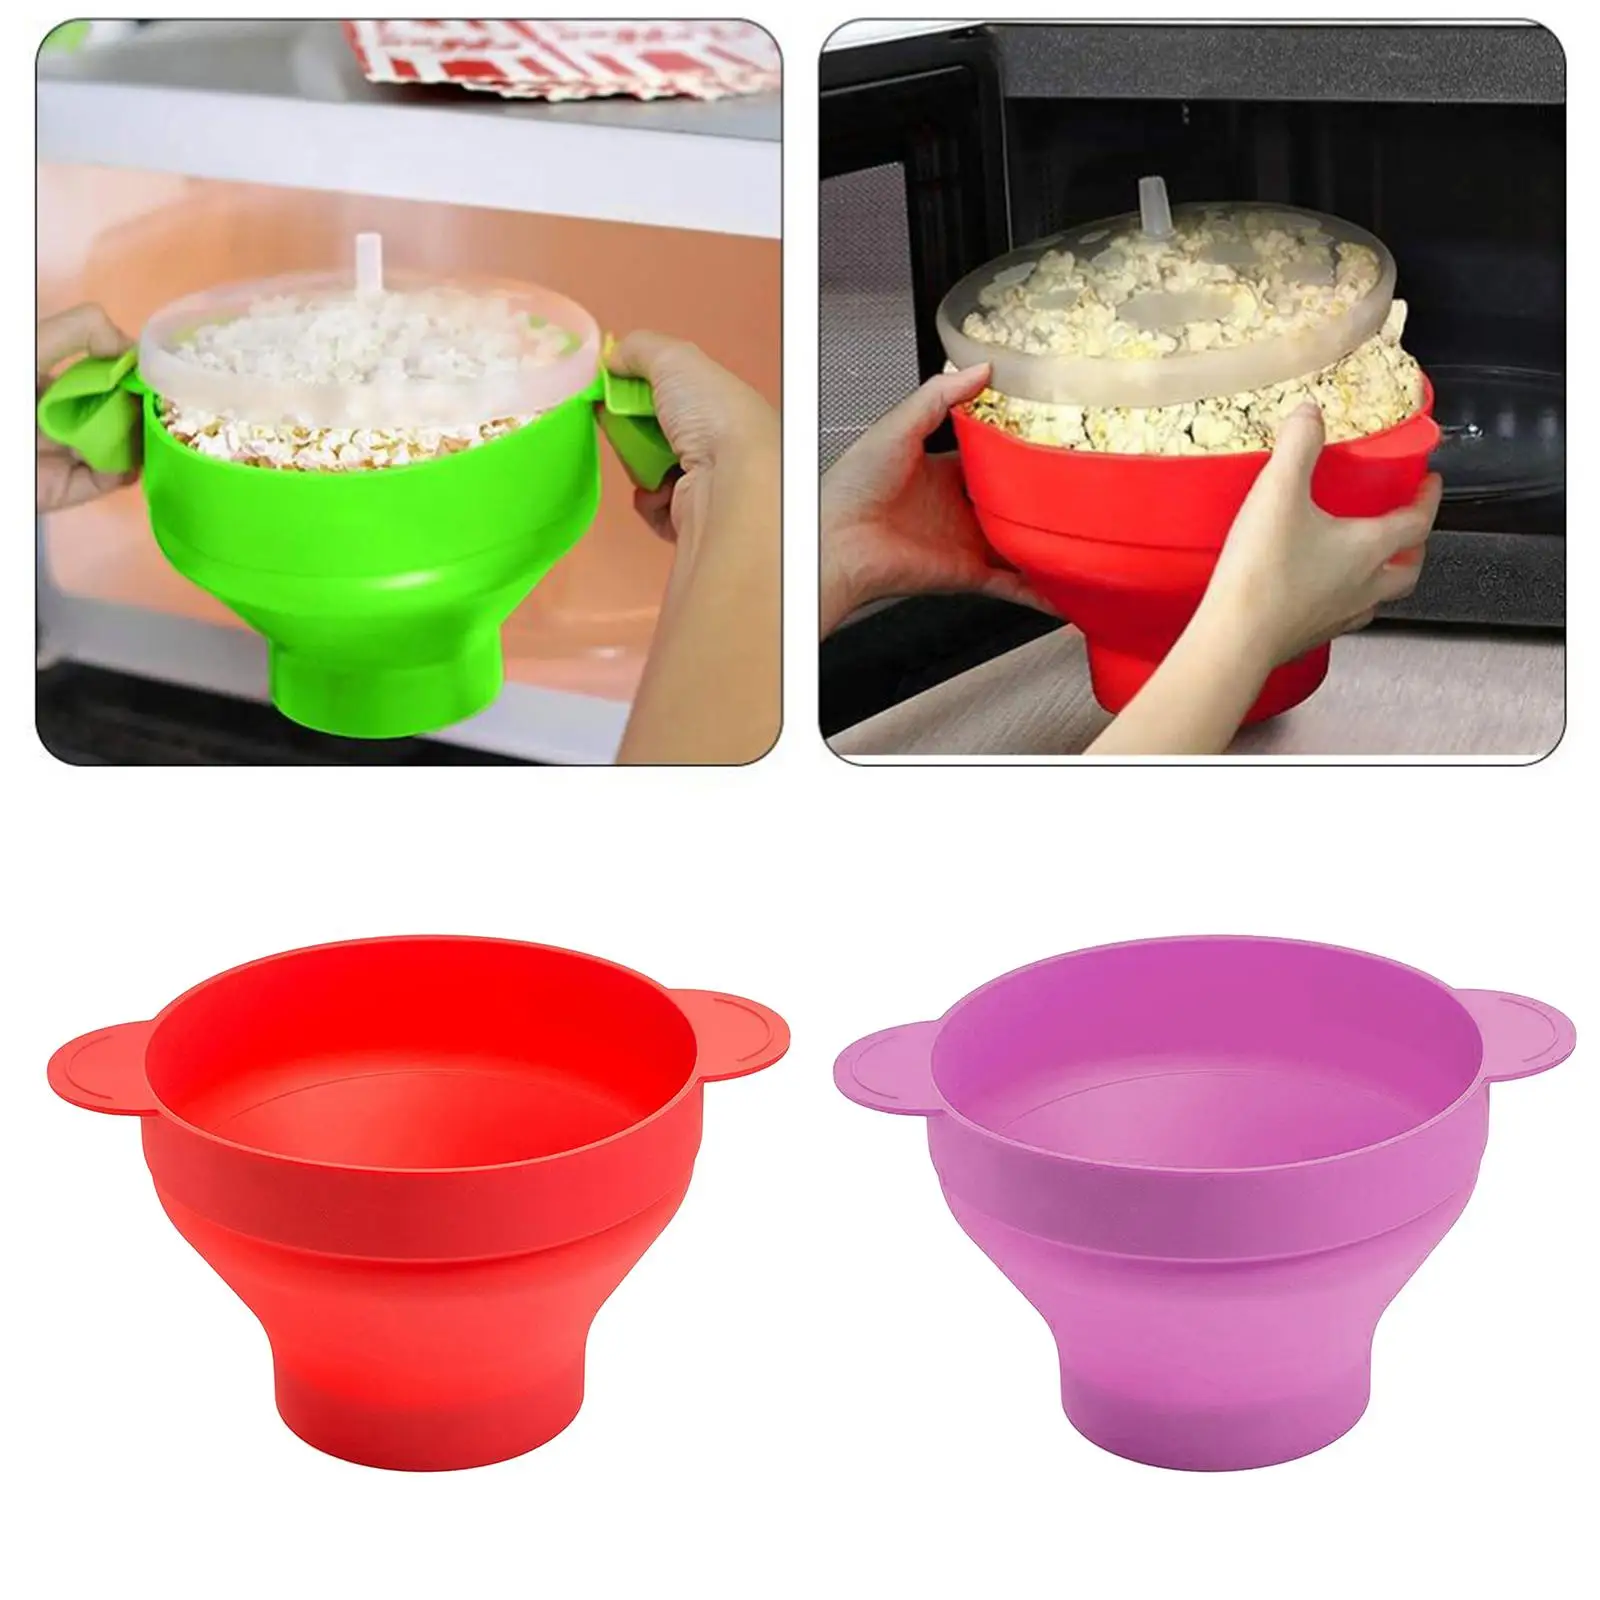 Silicone Collapsible Microwave Popcorn Bowl BPA Free Healthy with Lid -40℃ to +230℃ Movie Accessories